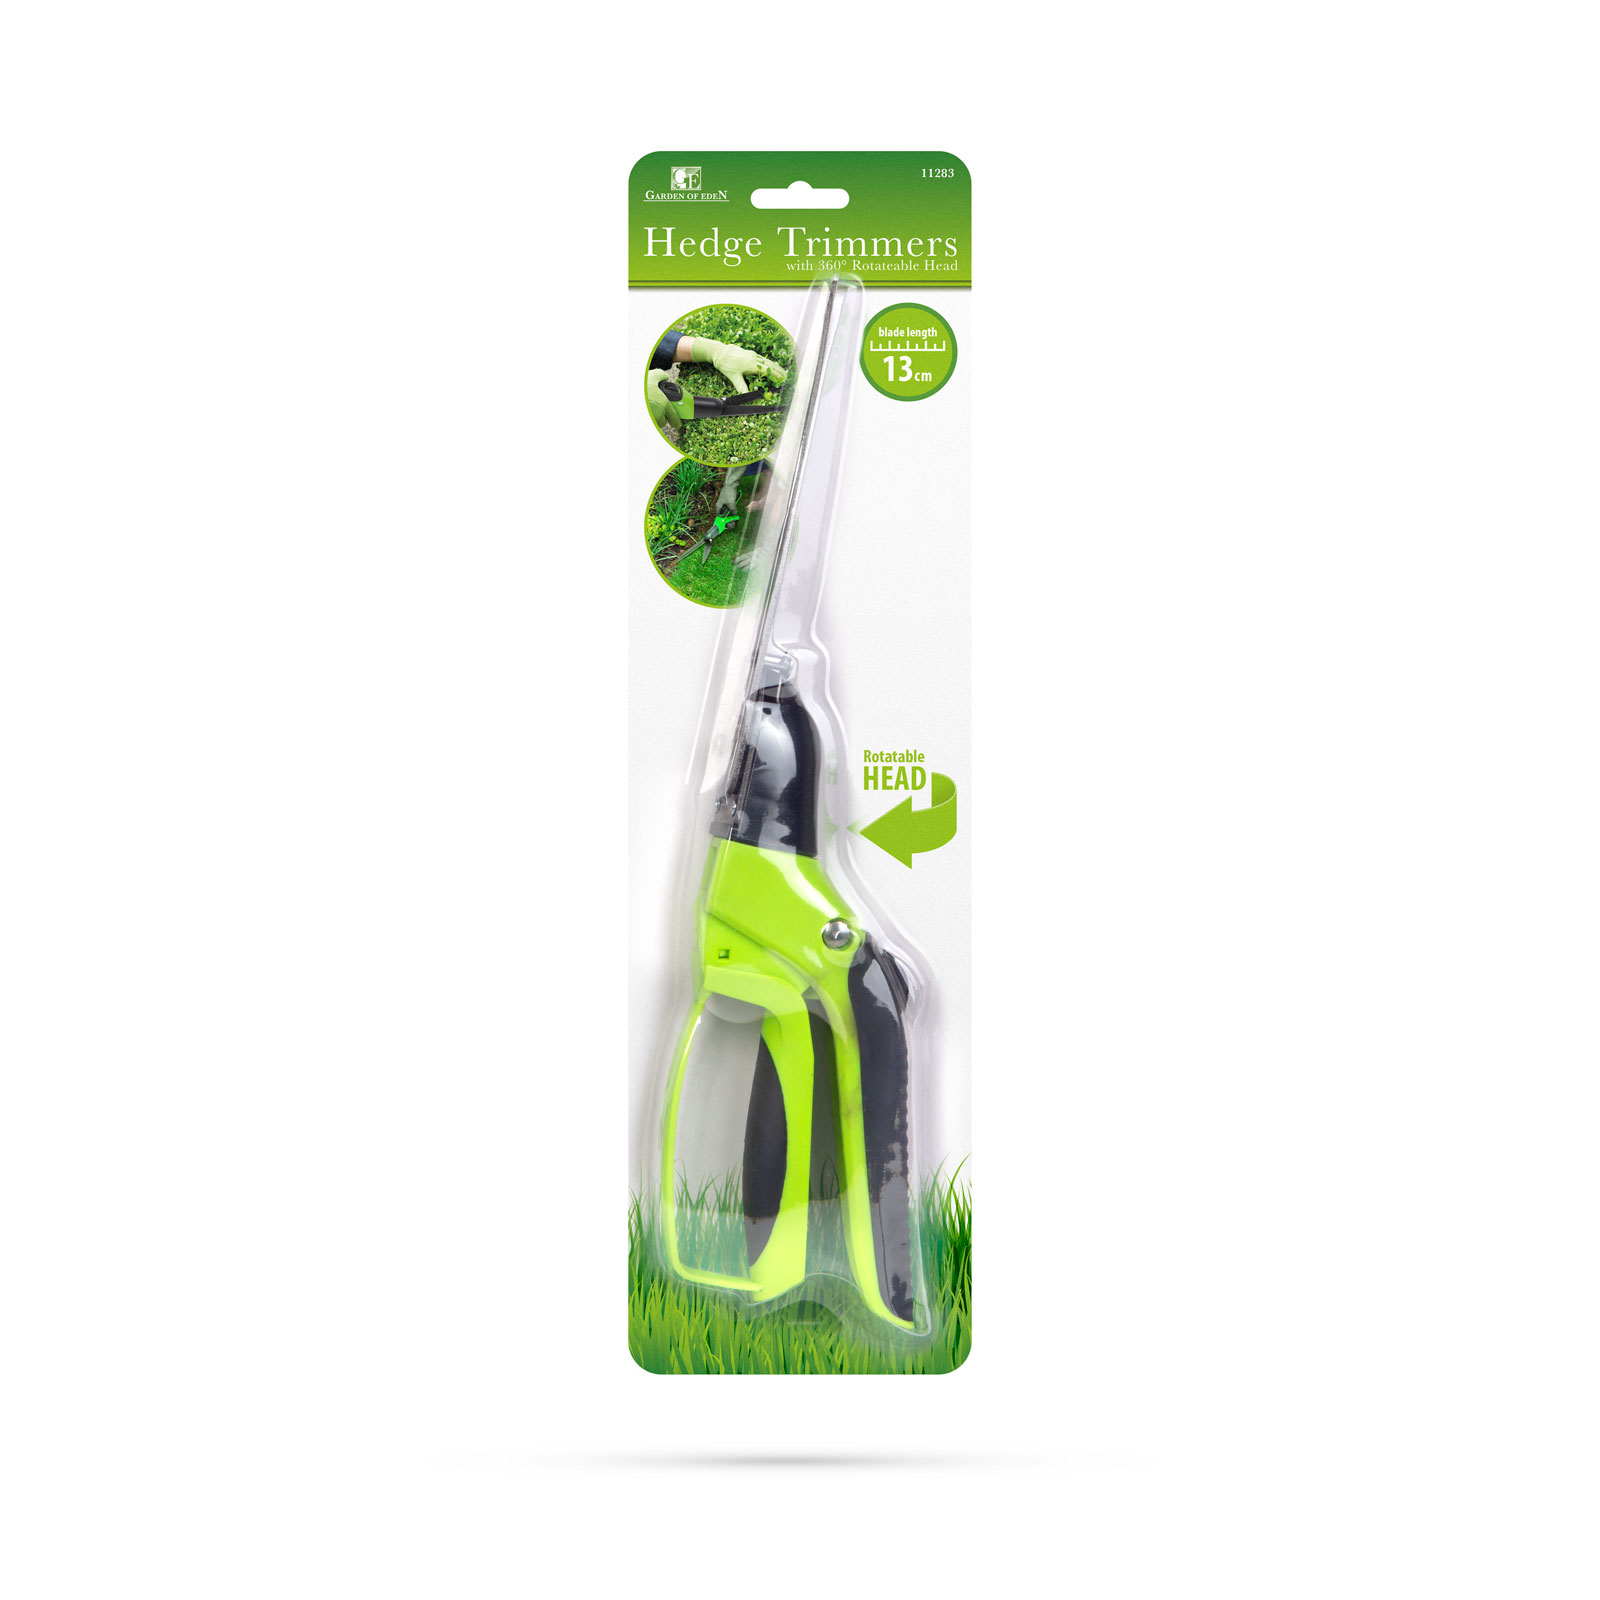 Hedge trimmers - with 360° rotateable head - 350 x 130 x 40 mm thumb